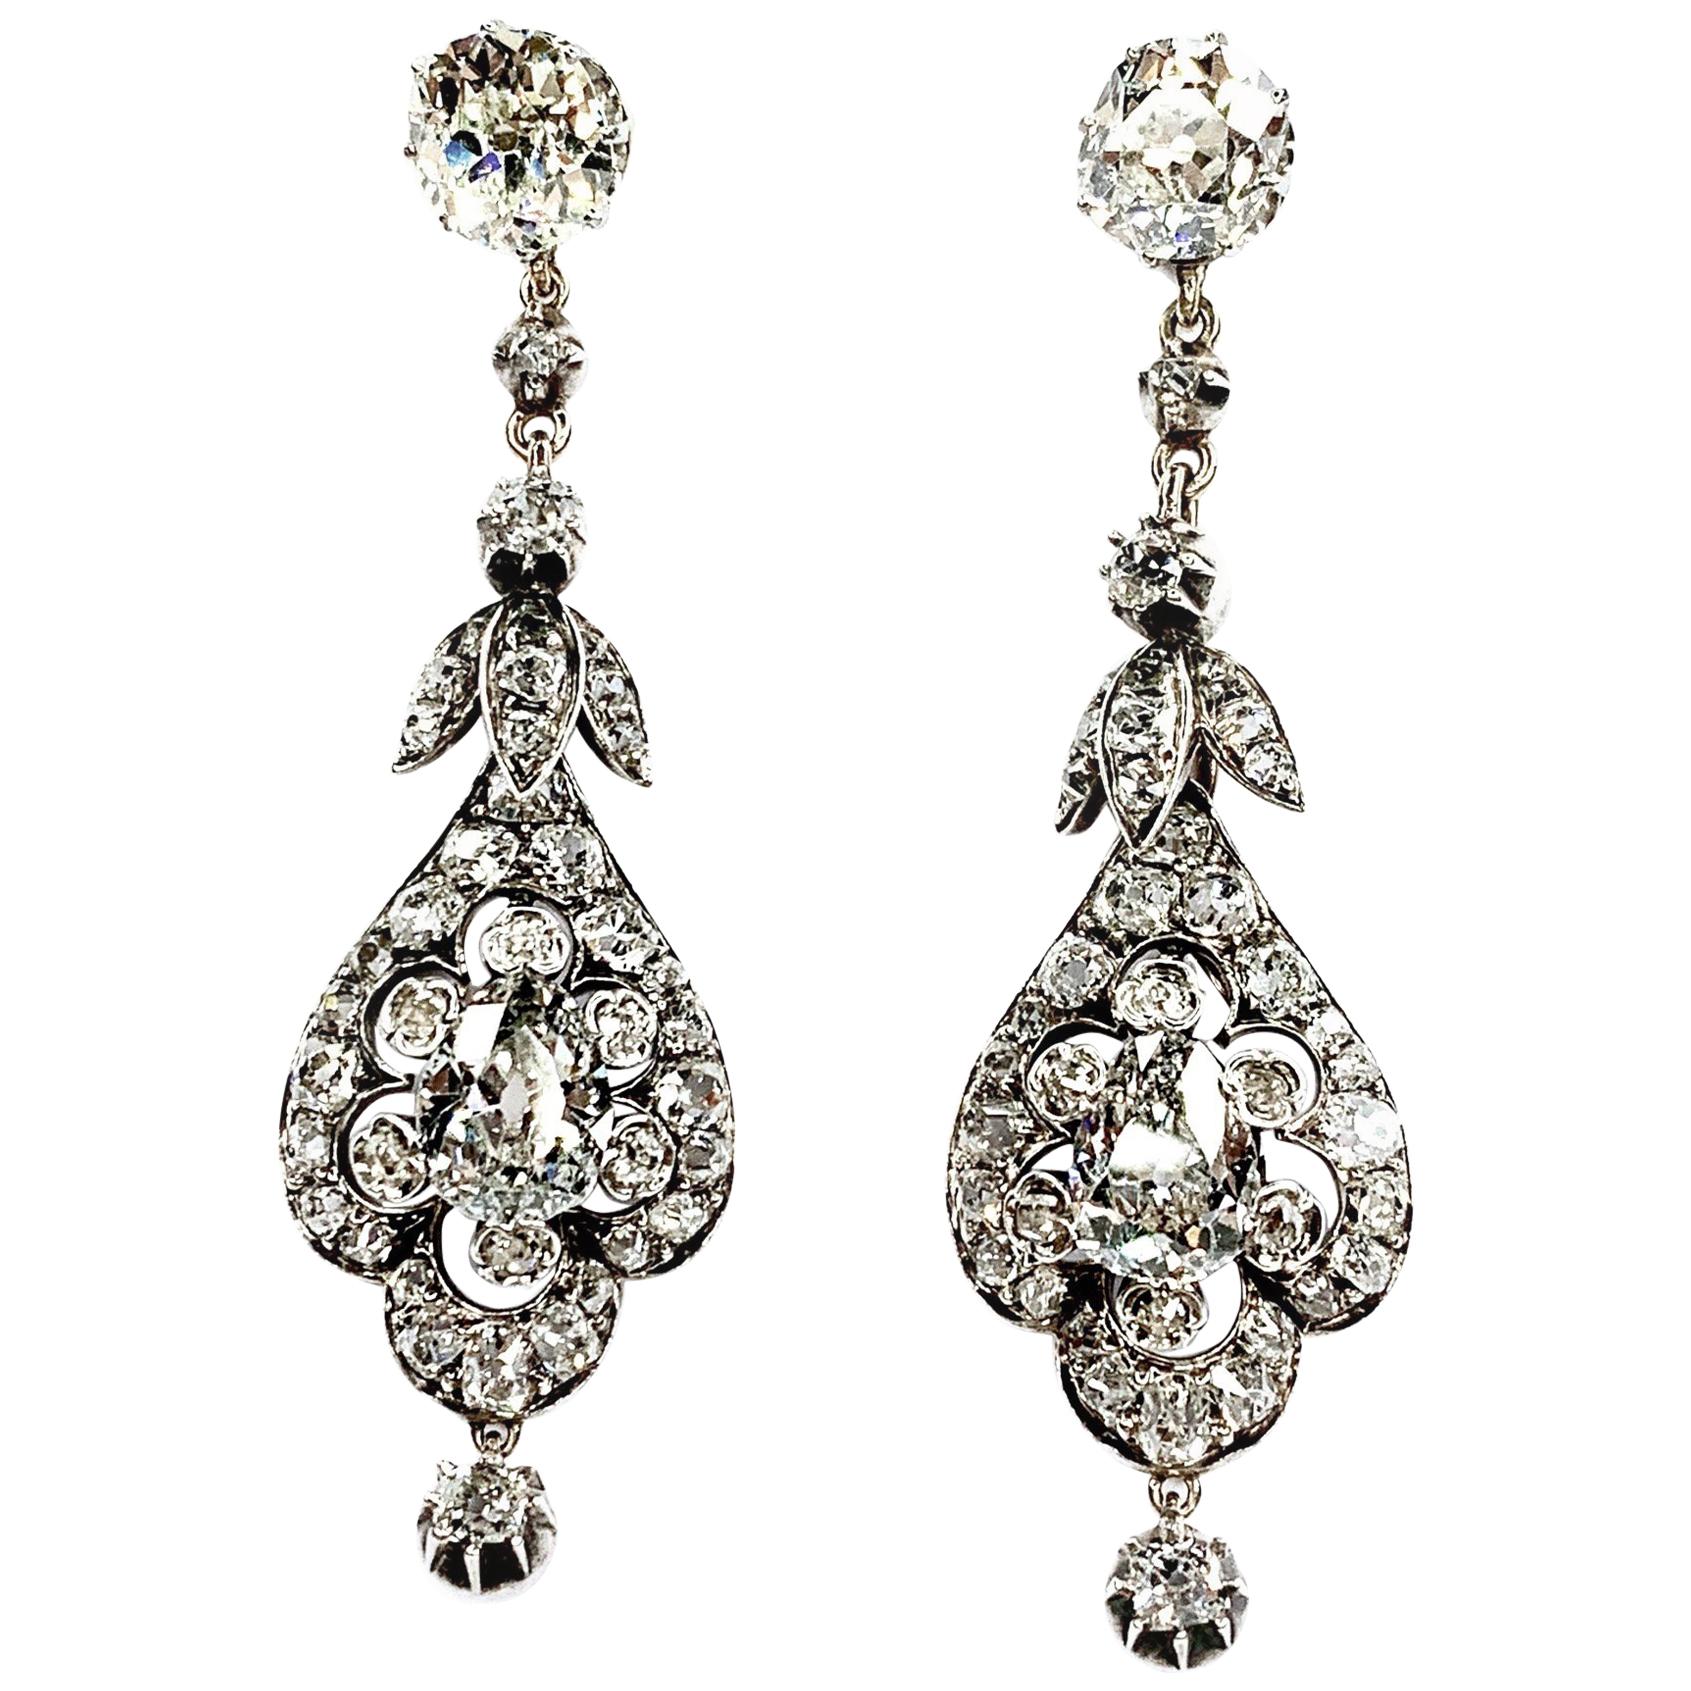 GEMOLITHOS Antique Pair of Diamond Earrings, Formerly from a Princely Family For Sale